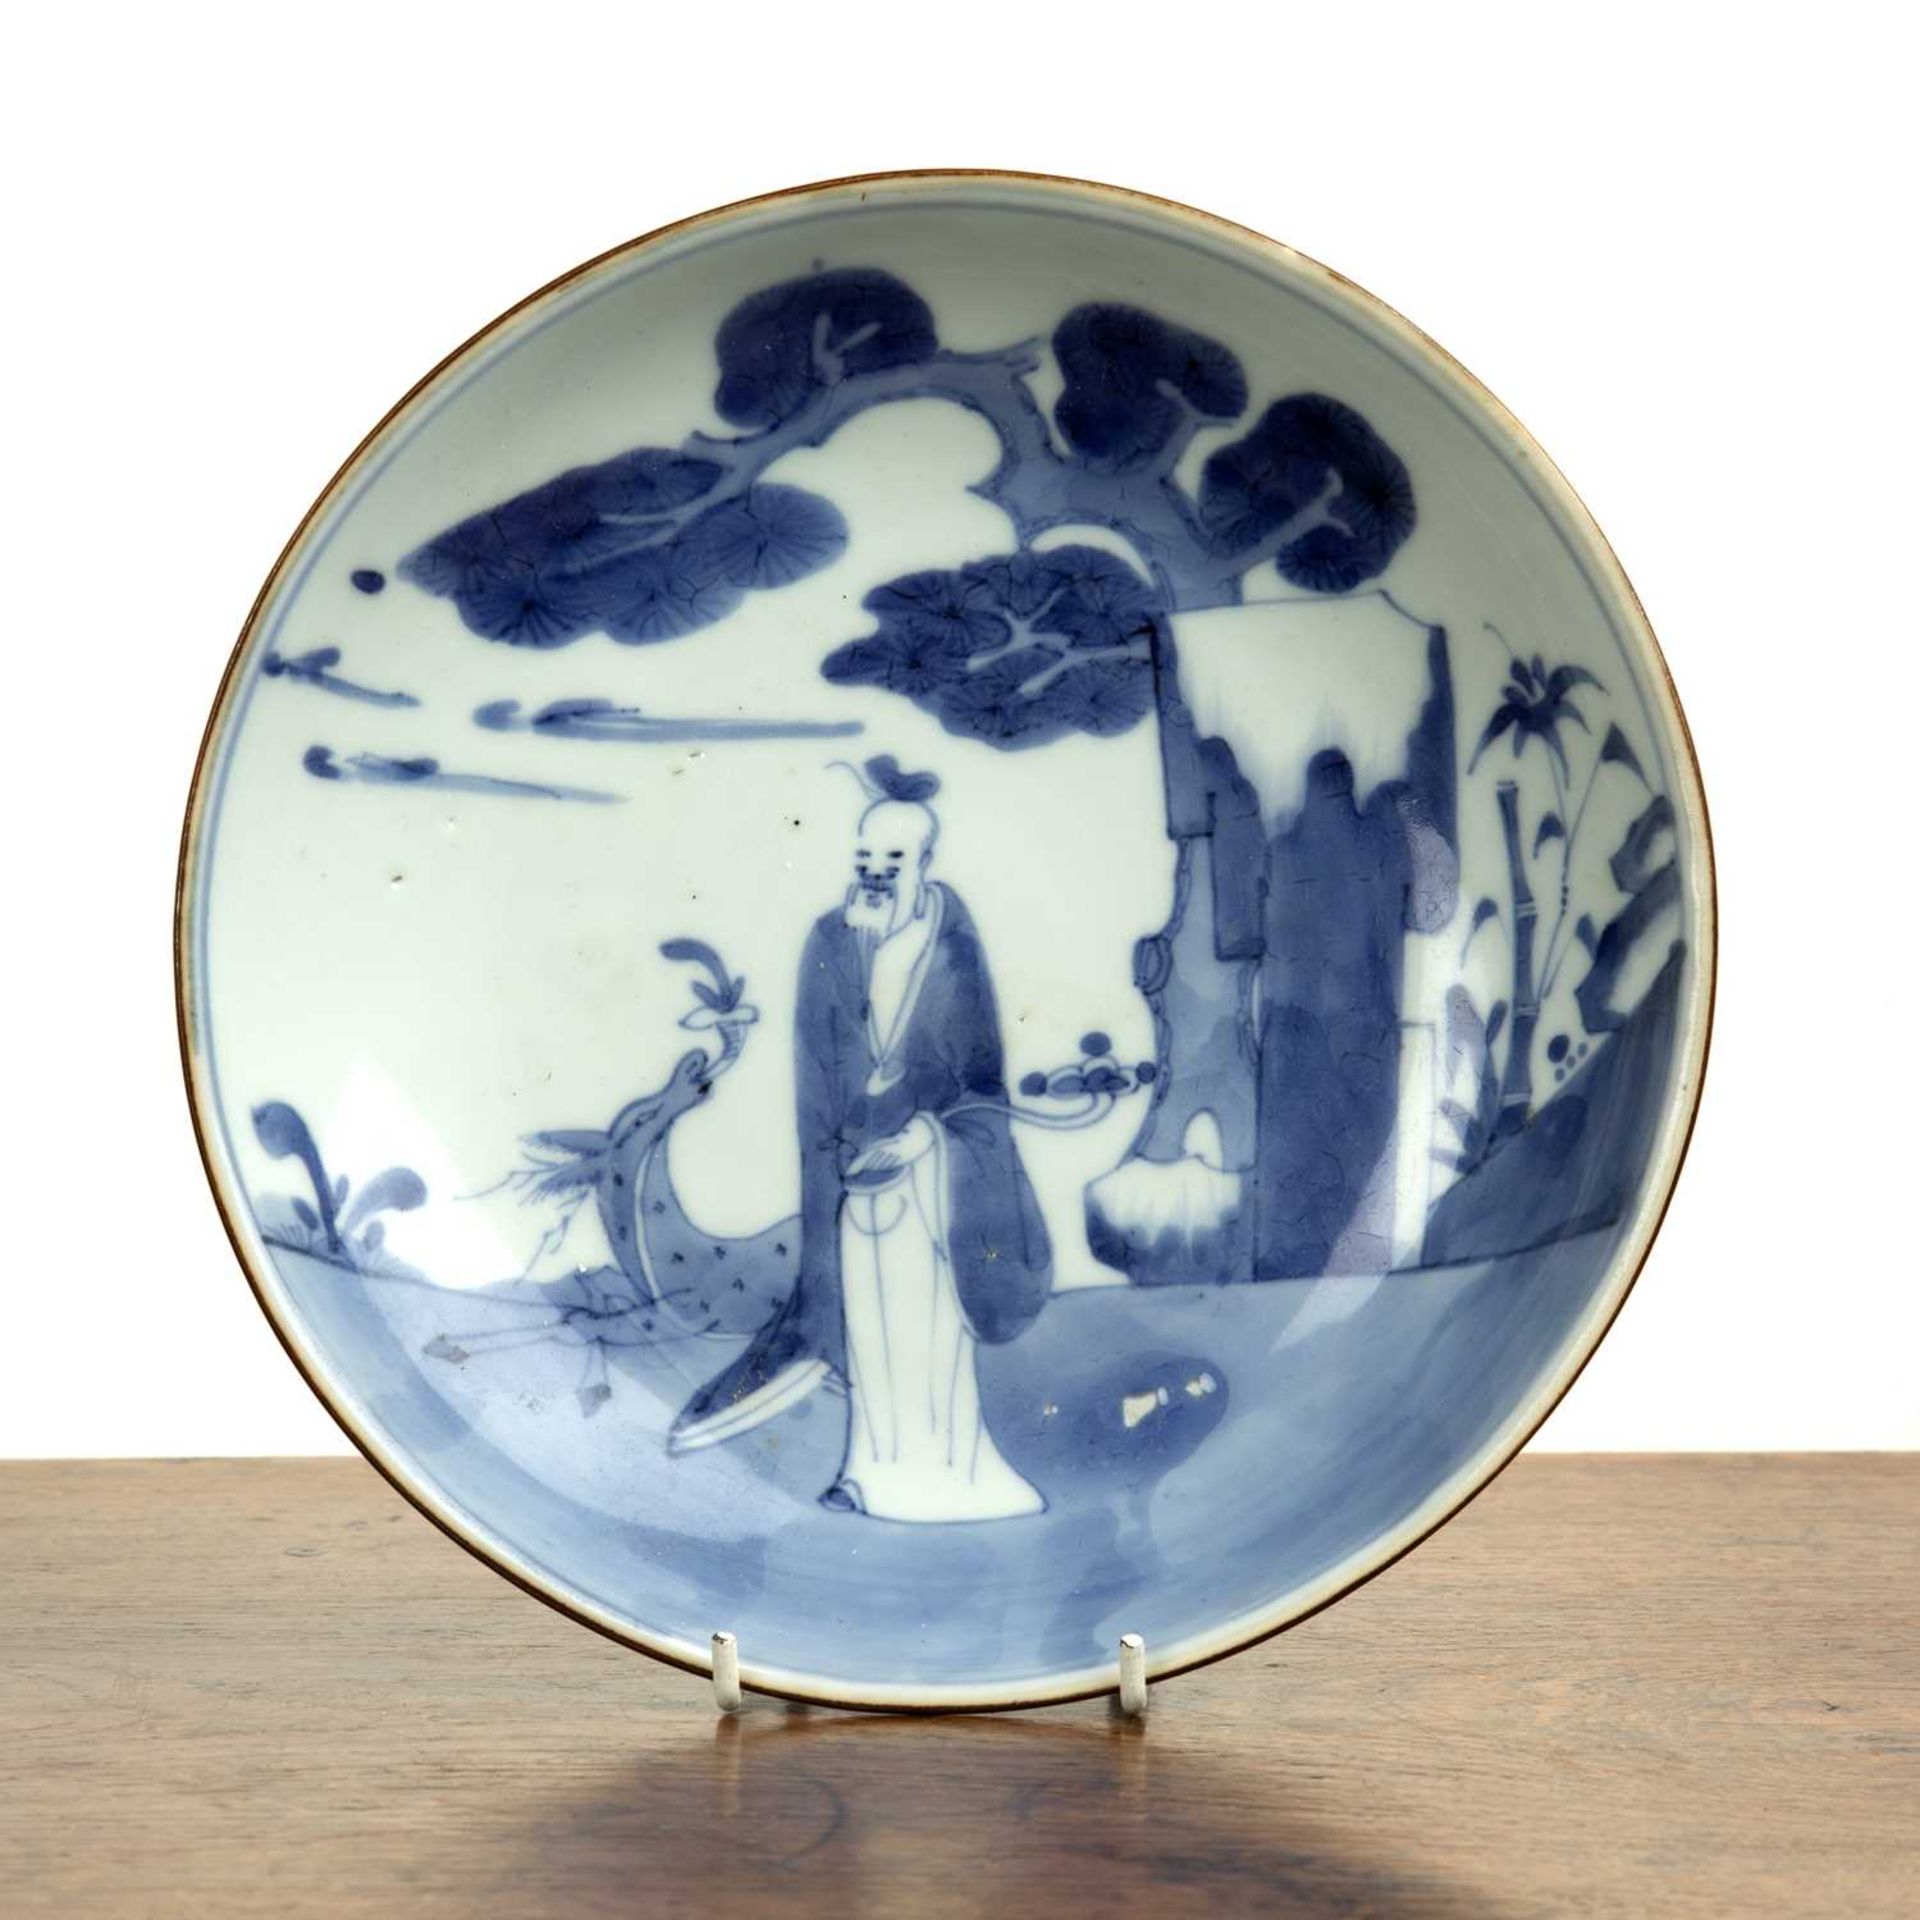 Blue and white porcelain shallow dish Chinese, 18th Century painted with a Lohan holding a ruyi